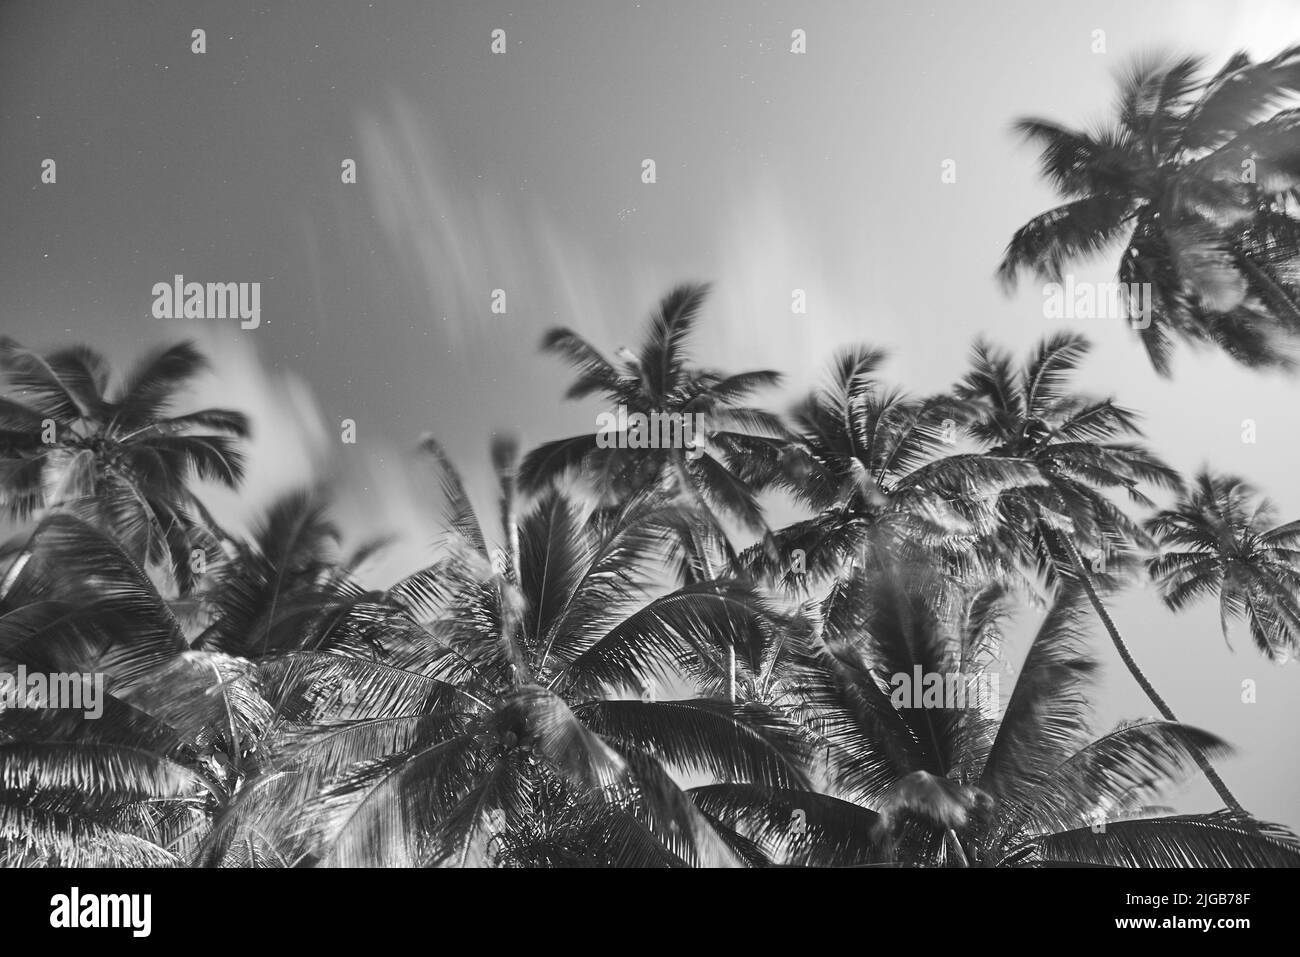 palm trees with coconut on background of night sky with stars Stock Photo